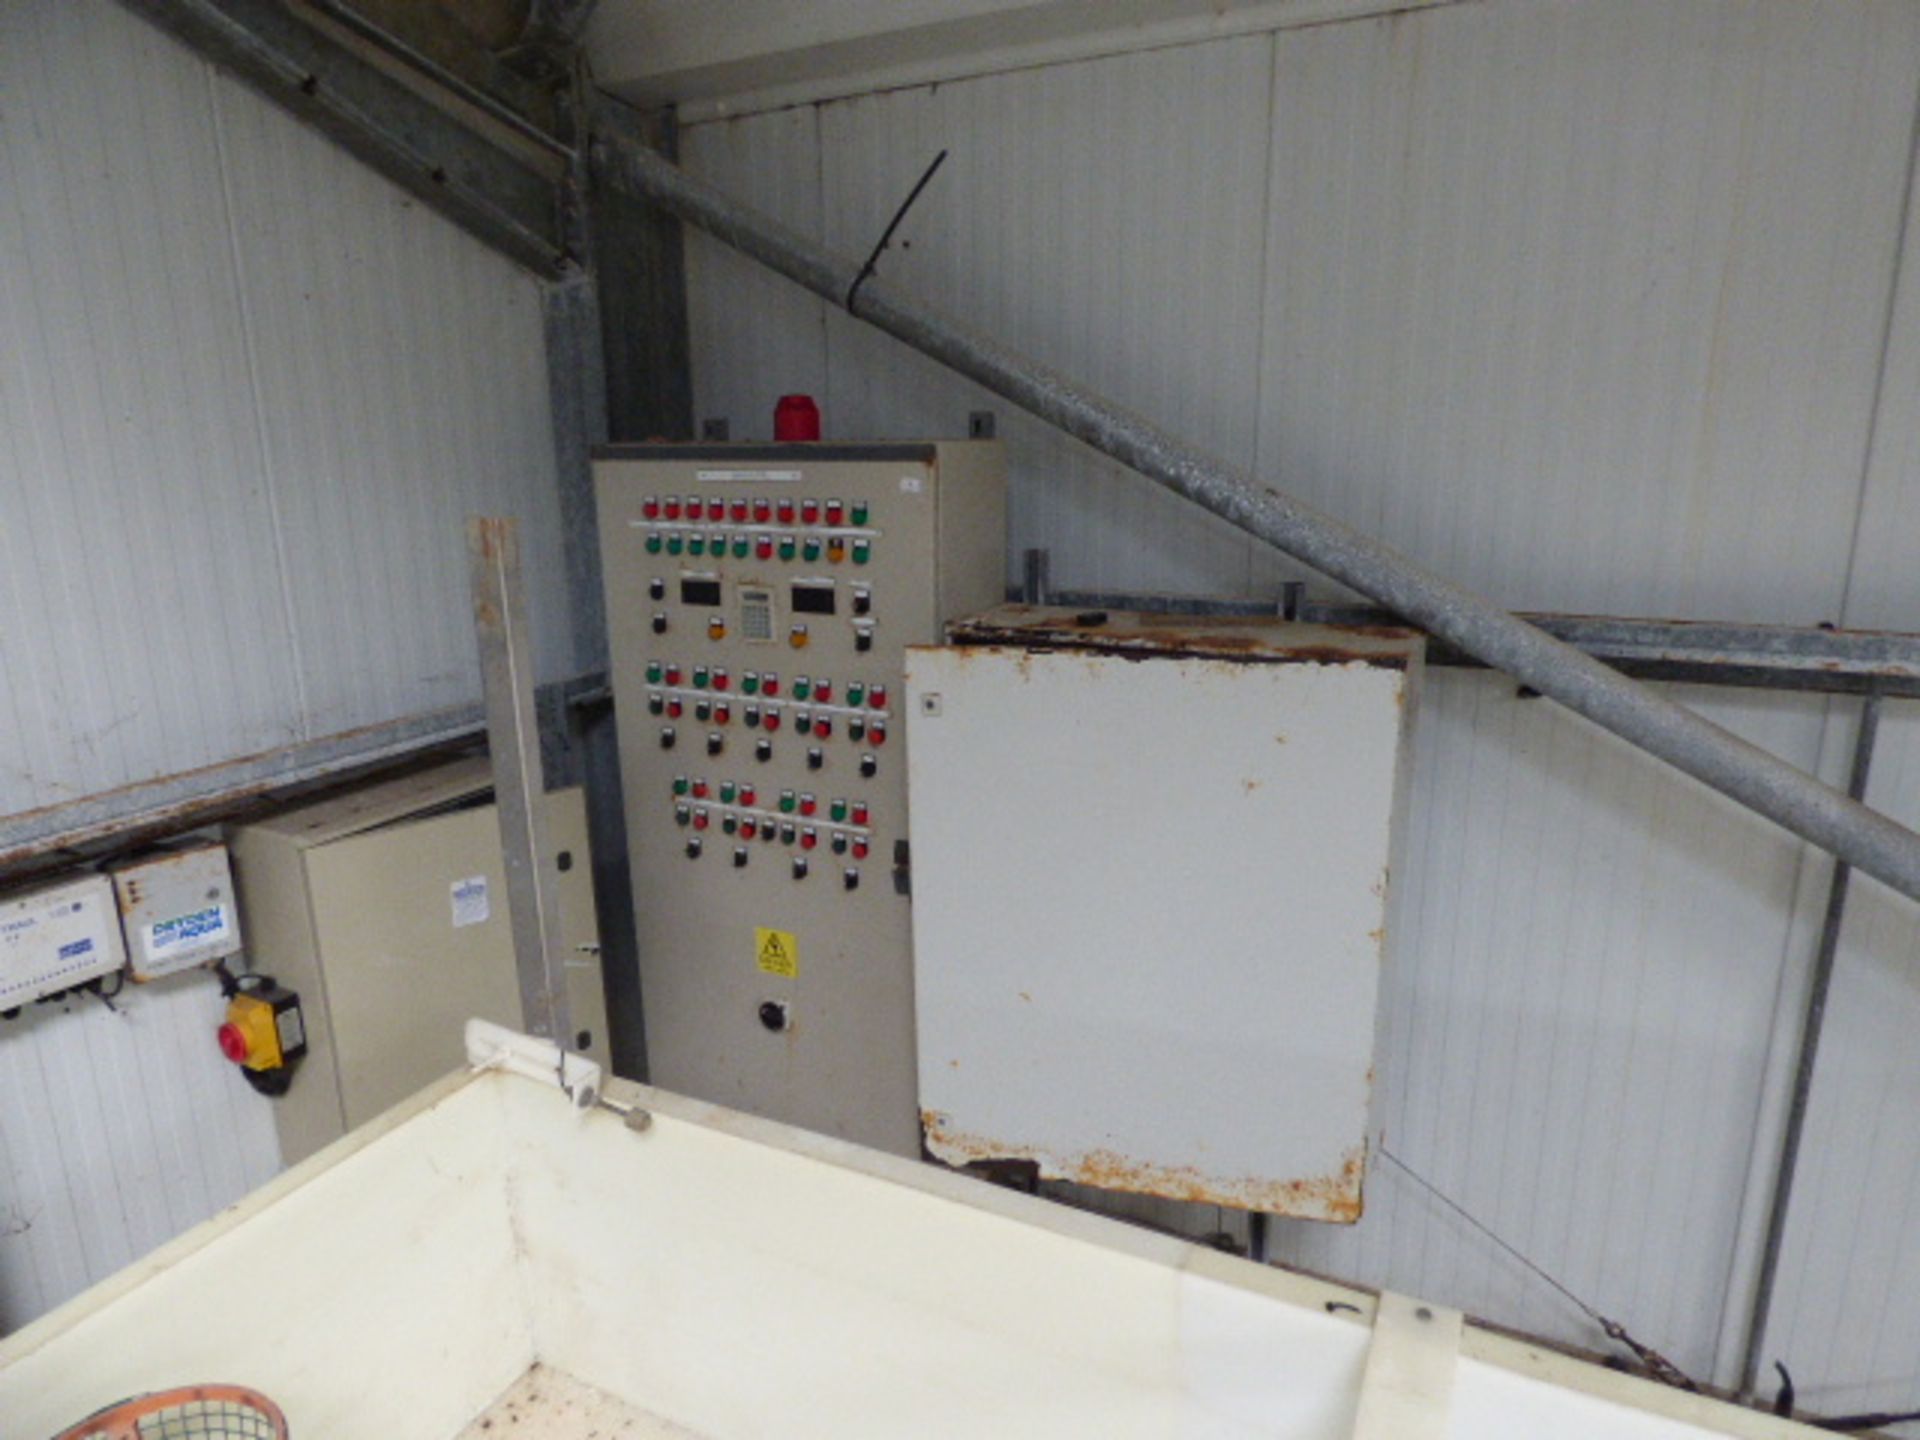 Suffolk Fish Farm Turbot Rearing System Control Panels - Image 3 of 4